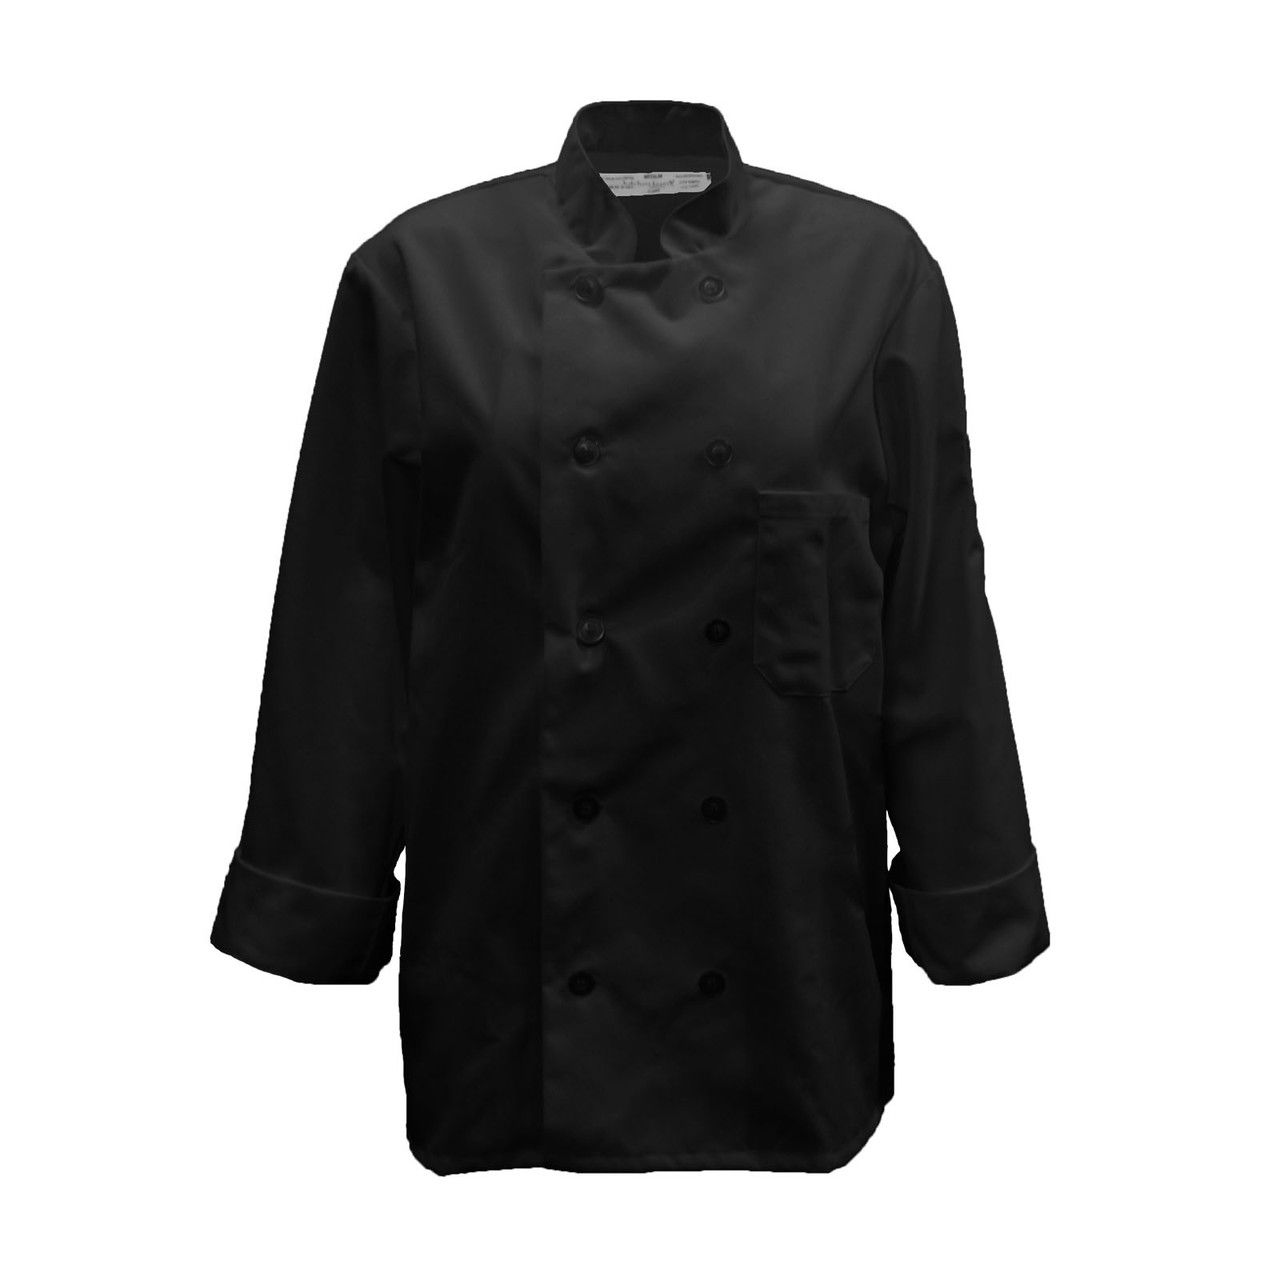 What sizes are available for the Basic Economy Double-Breasted Black Chef Coat?